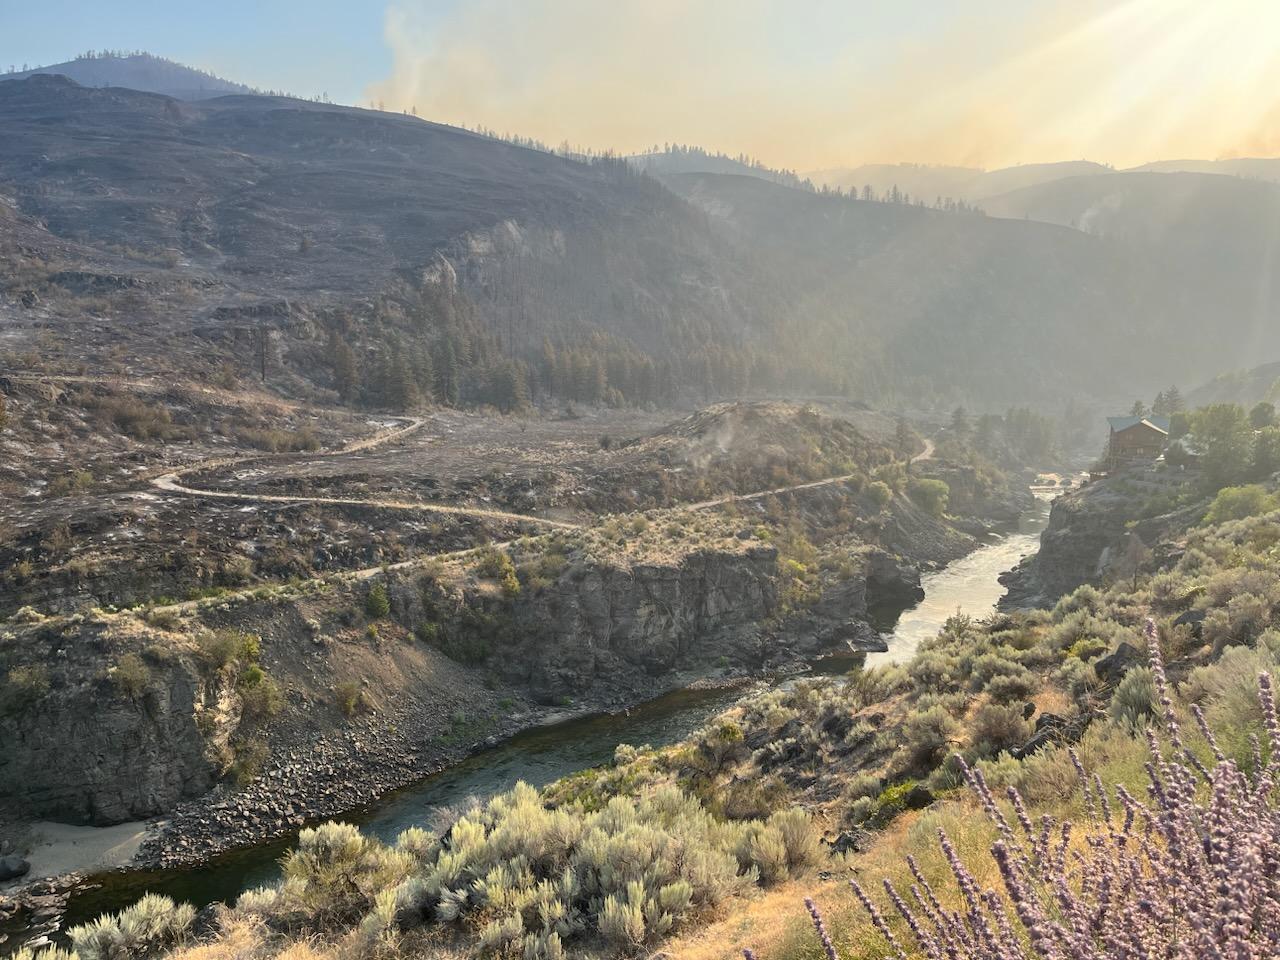 A burned landscape in the background with a home on the Similkameen River in the foreground